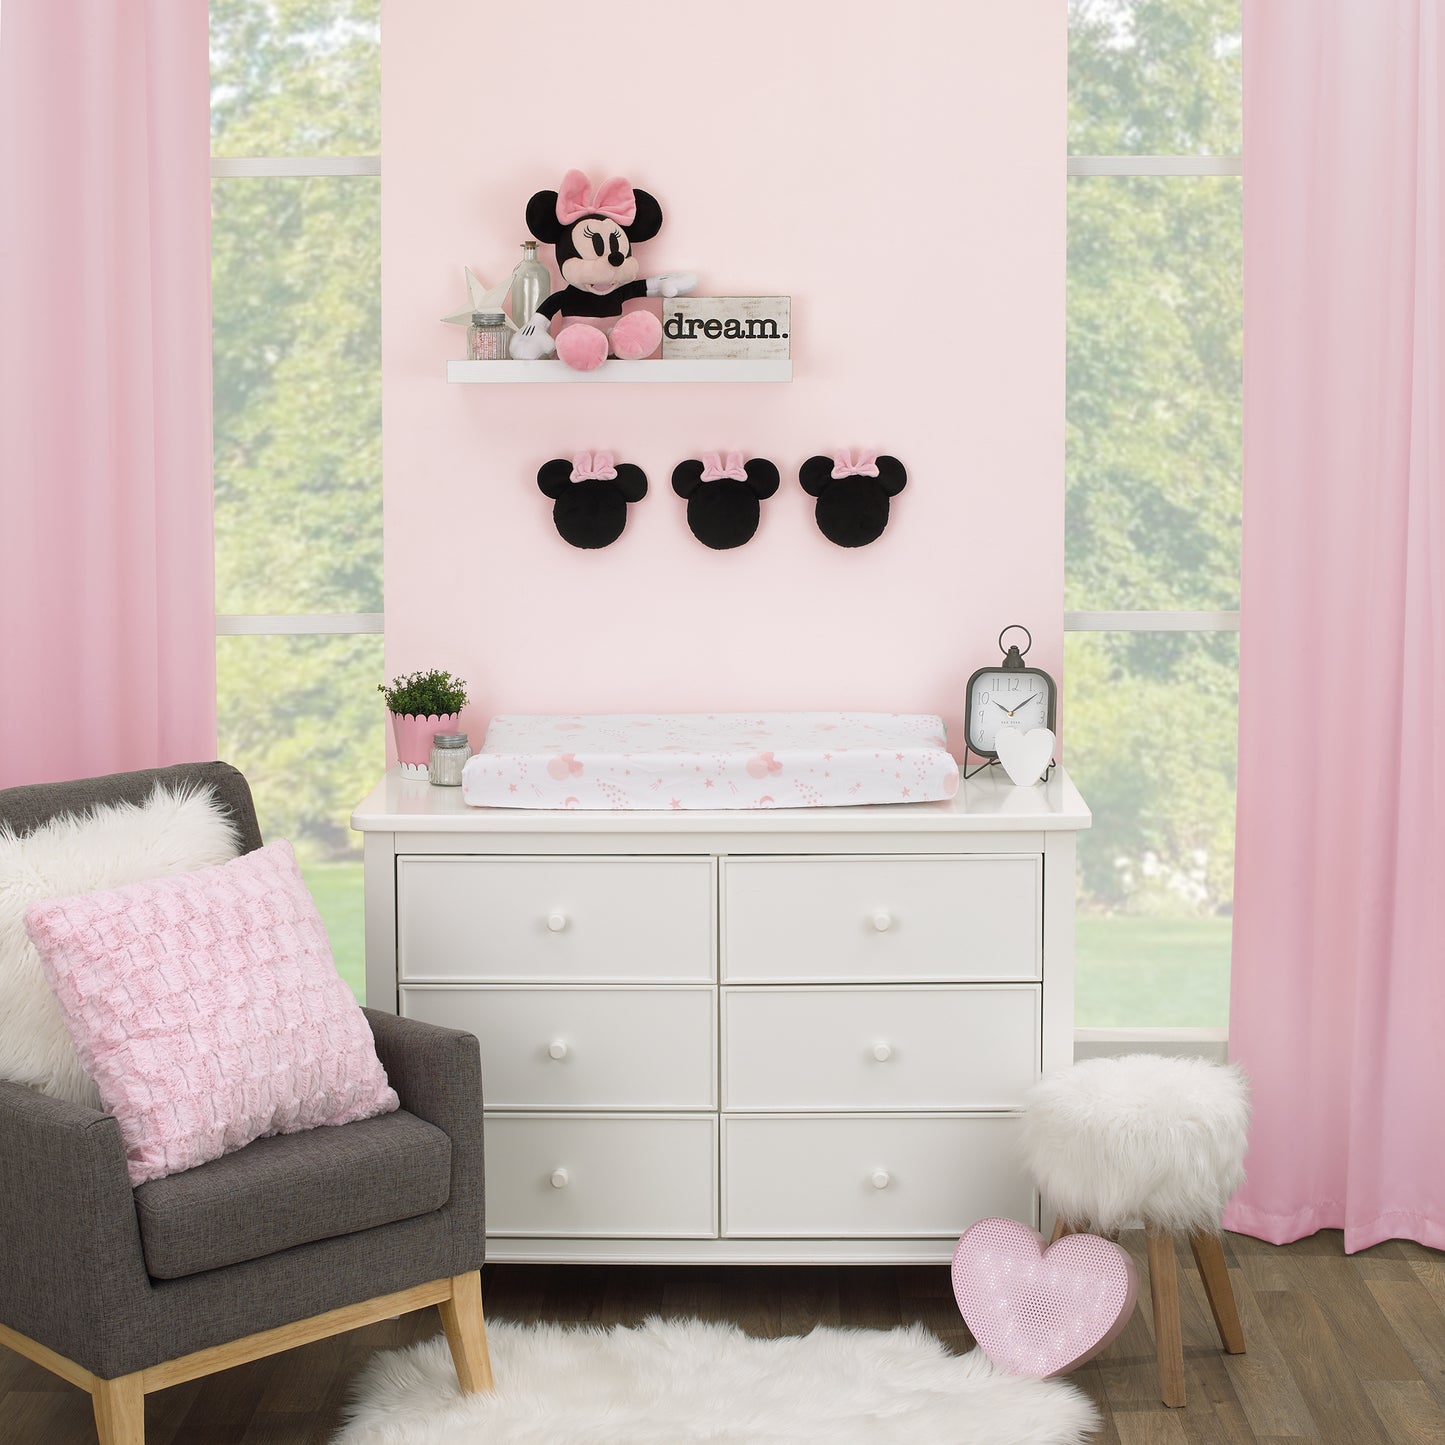 Disney Minnie Mouse Shaped Black Plush with Pink Bow 3 Piece Wall Décor